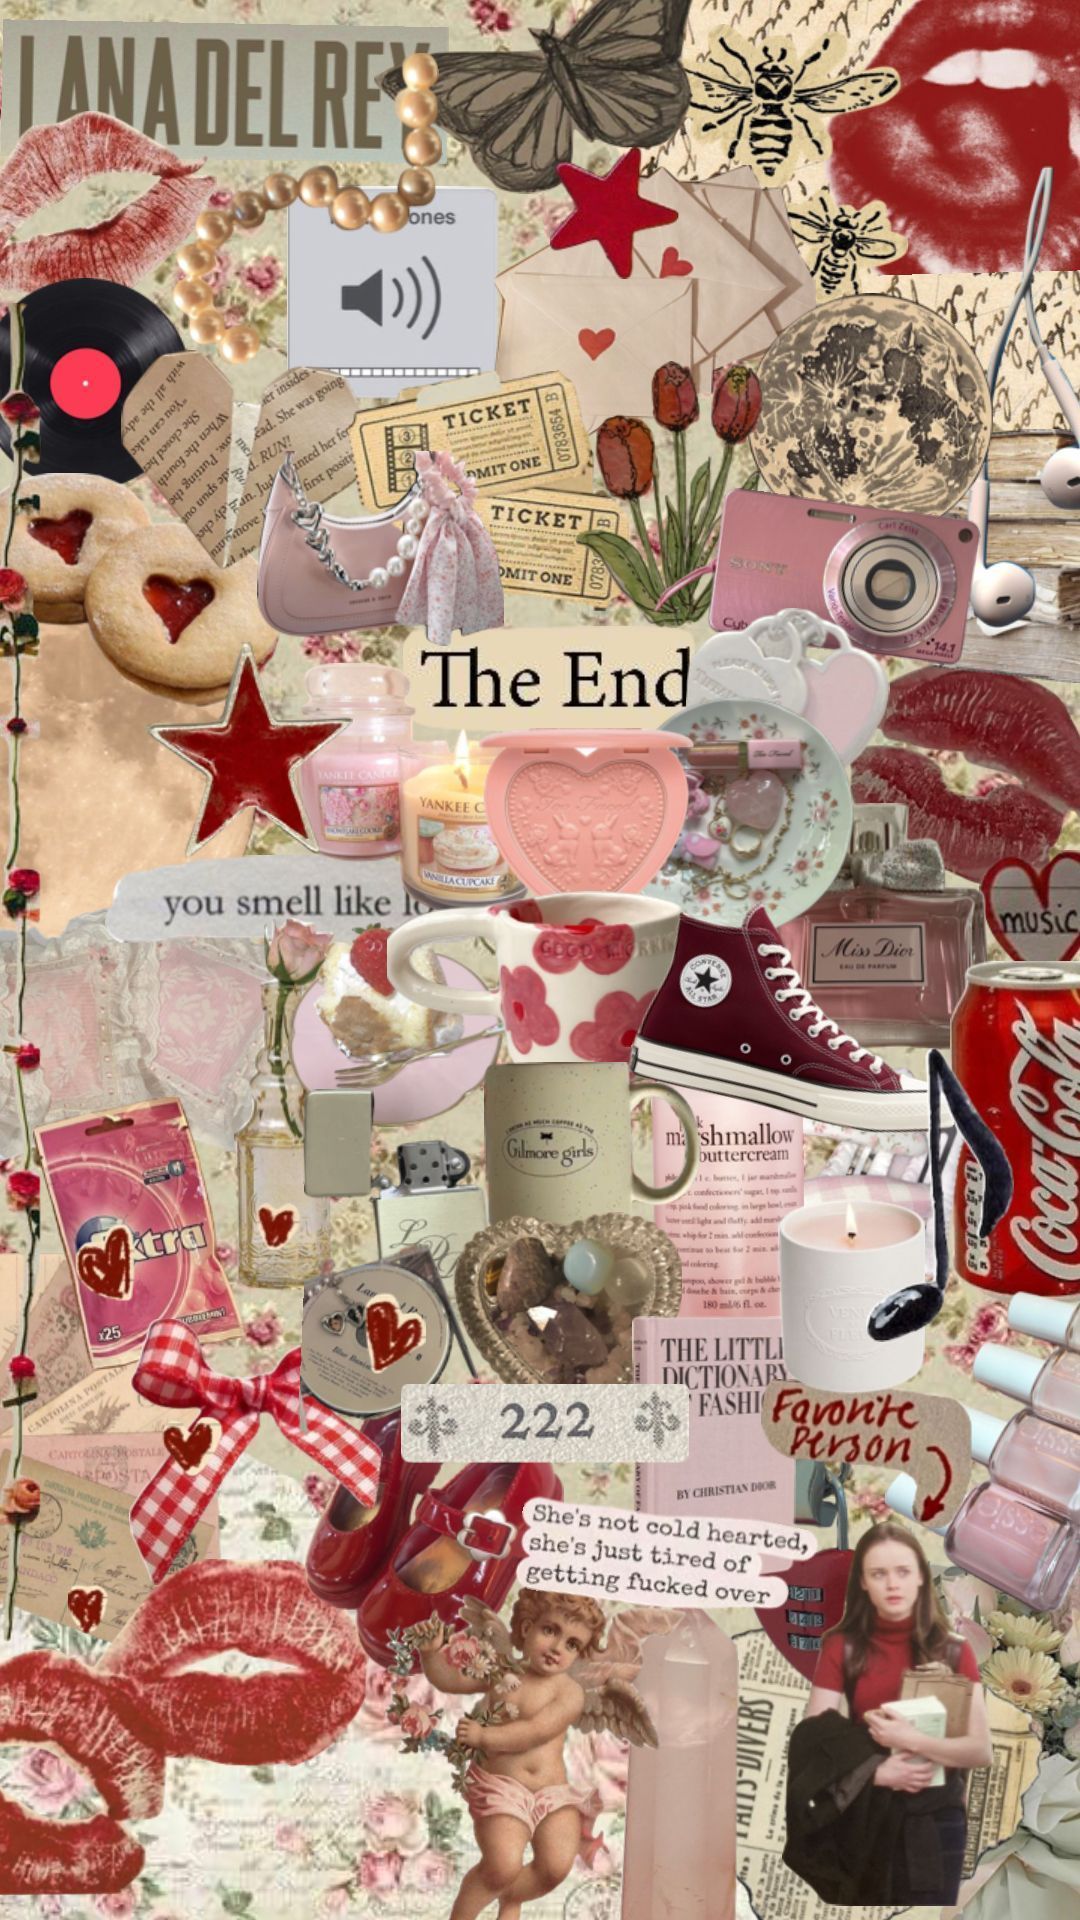 A collage of various items including a cup, a book, a butterfly, and a red lip print. - Coquette